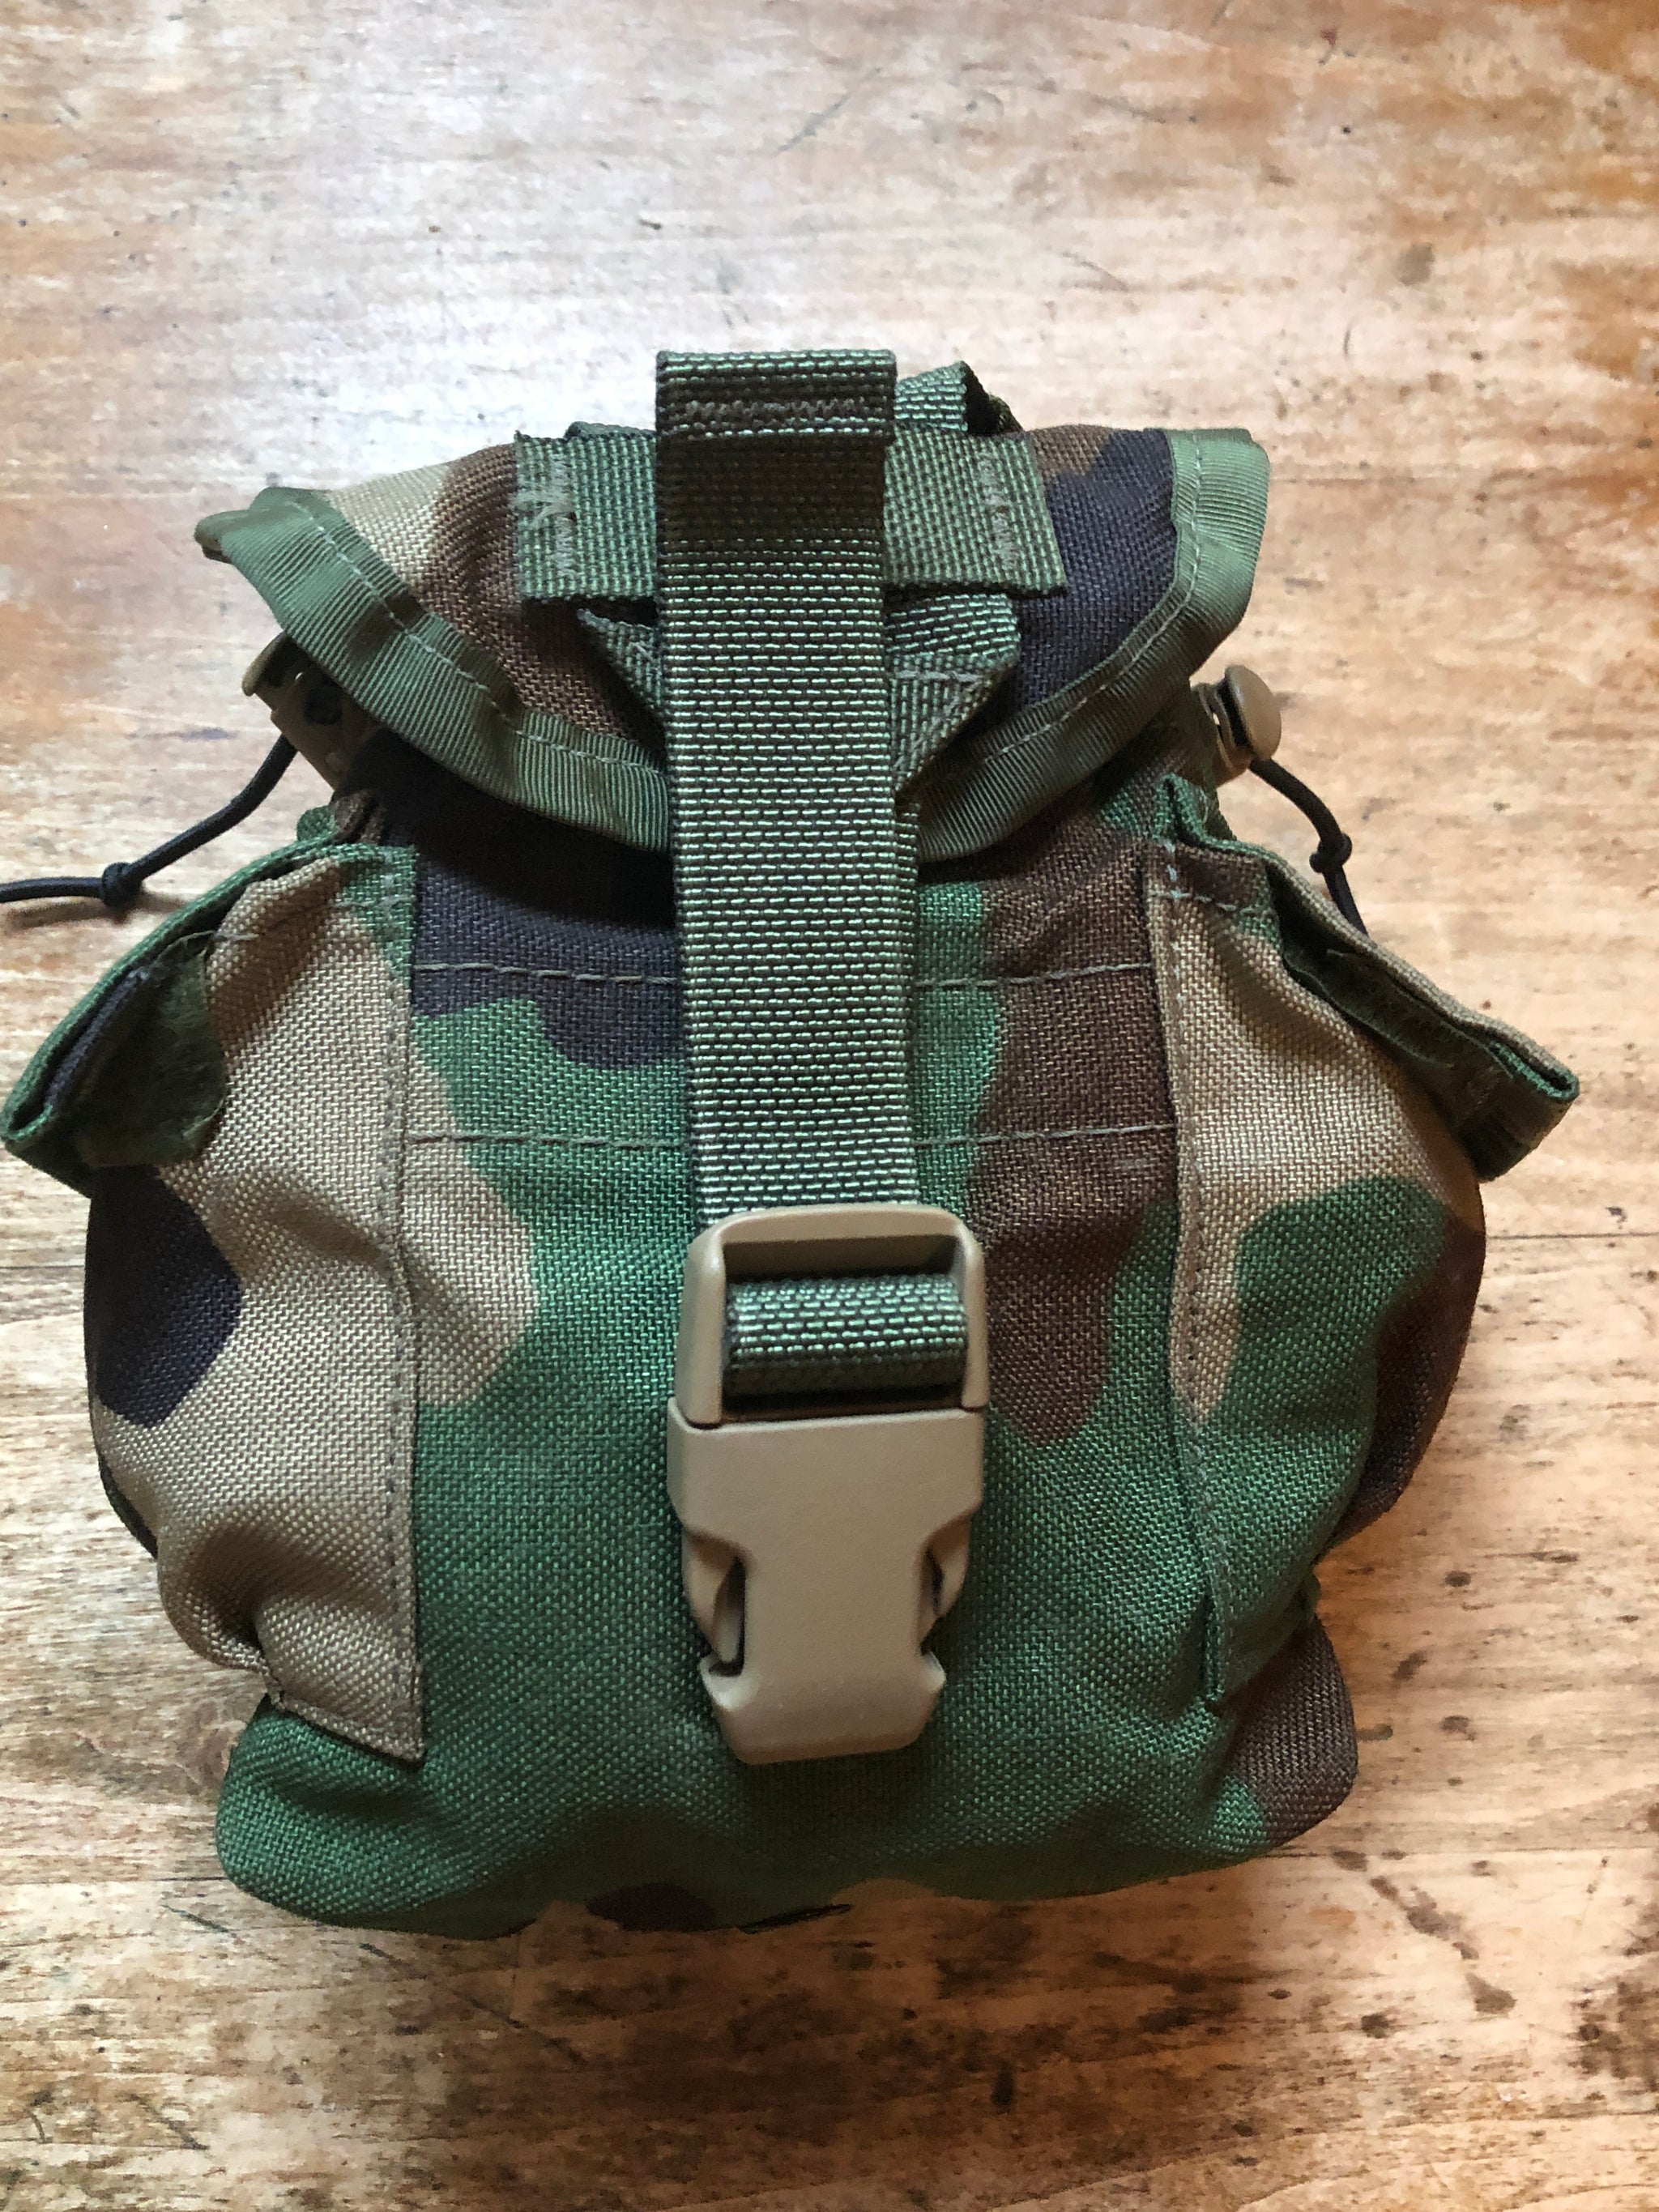 Military MOLLE Canteen Pouch & Canteen